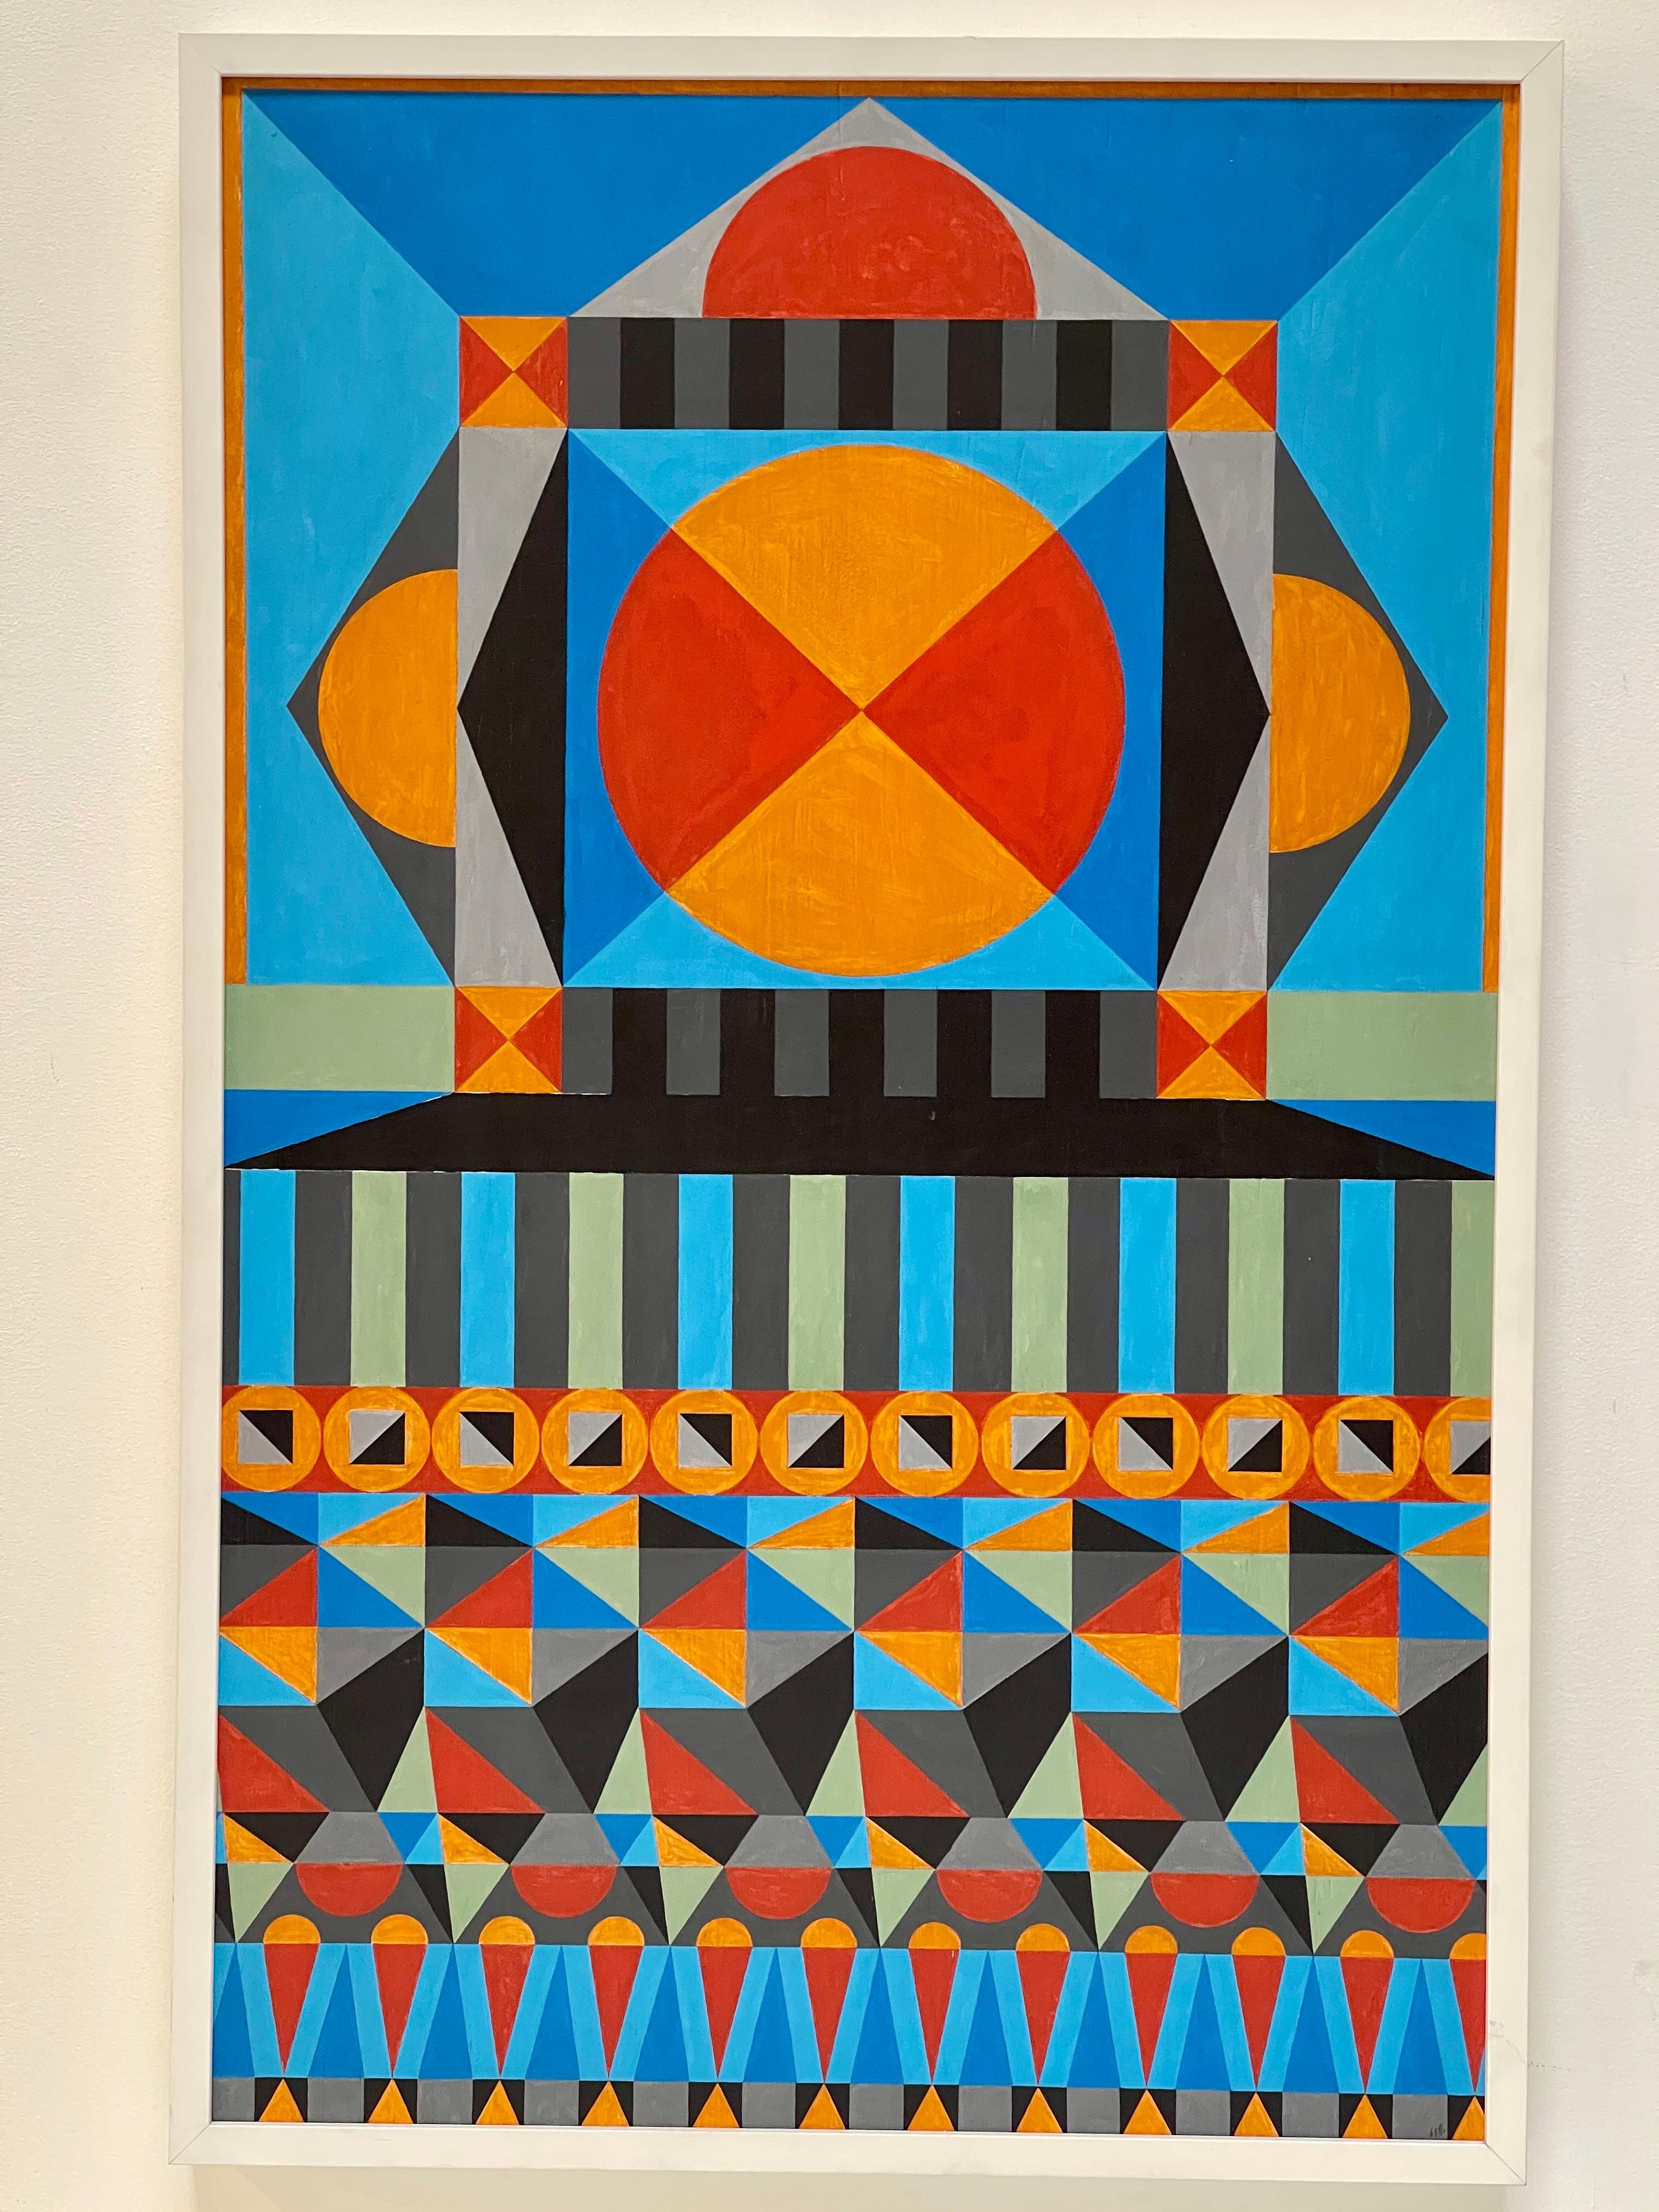 Gouache on board titled: Variations. Painted by Barbara Stonecipher (1921-2011) who studied at Cranbrook and later became a member of the San Francisco Artists Co-op and Marin Society of Artists. Signed and dated, 1960.
Illustrated 